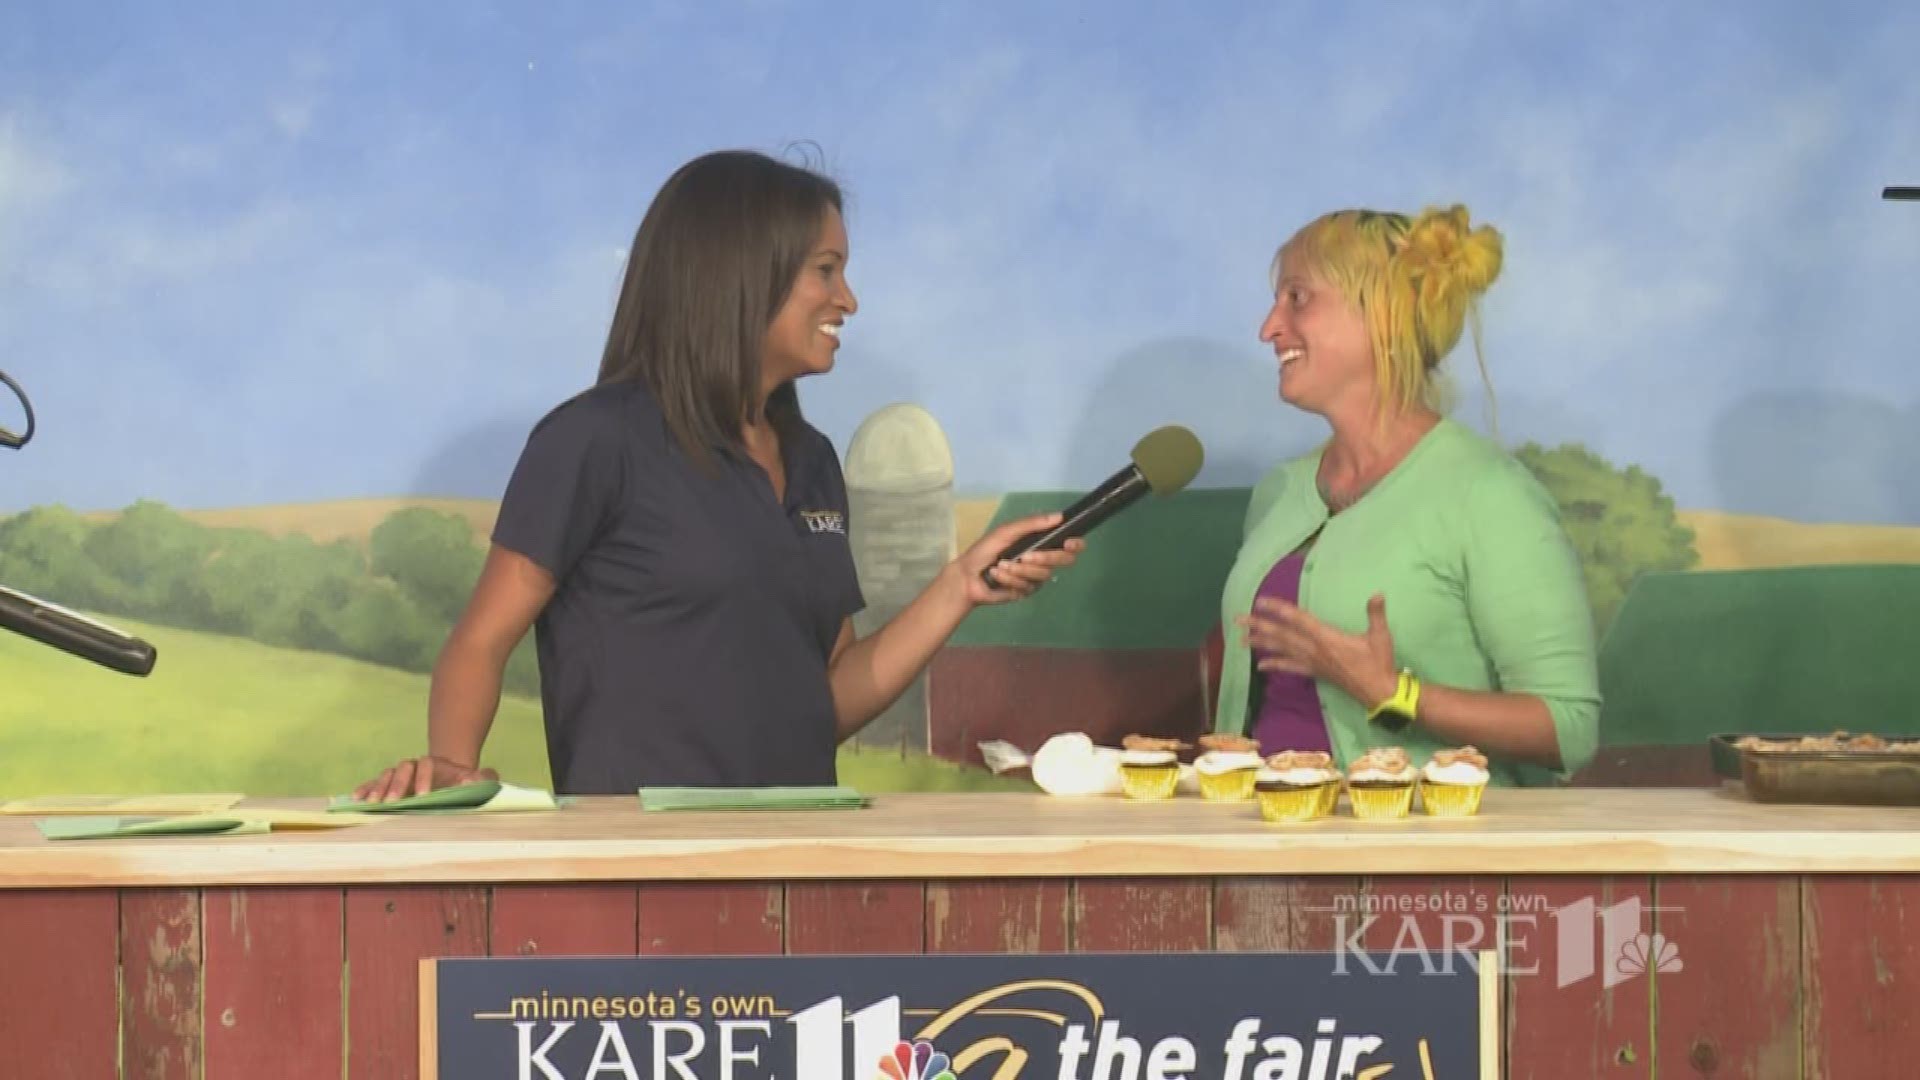 Minnesota state fair baker and blue ribbon winner Betsy Born stopped by the KARE 11 Barn to share tips for baking and decorating cupcakes. http://kare11.tv/2gAueLP